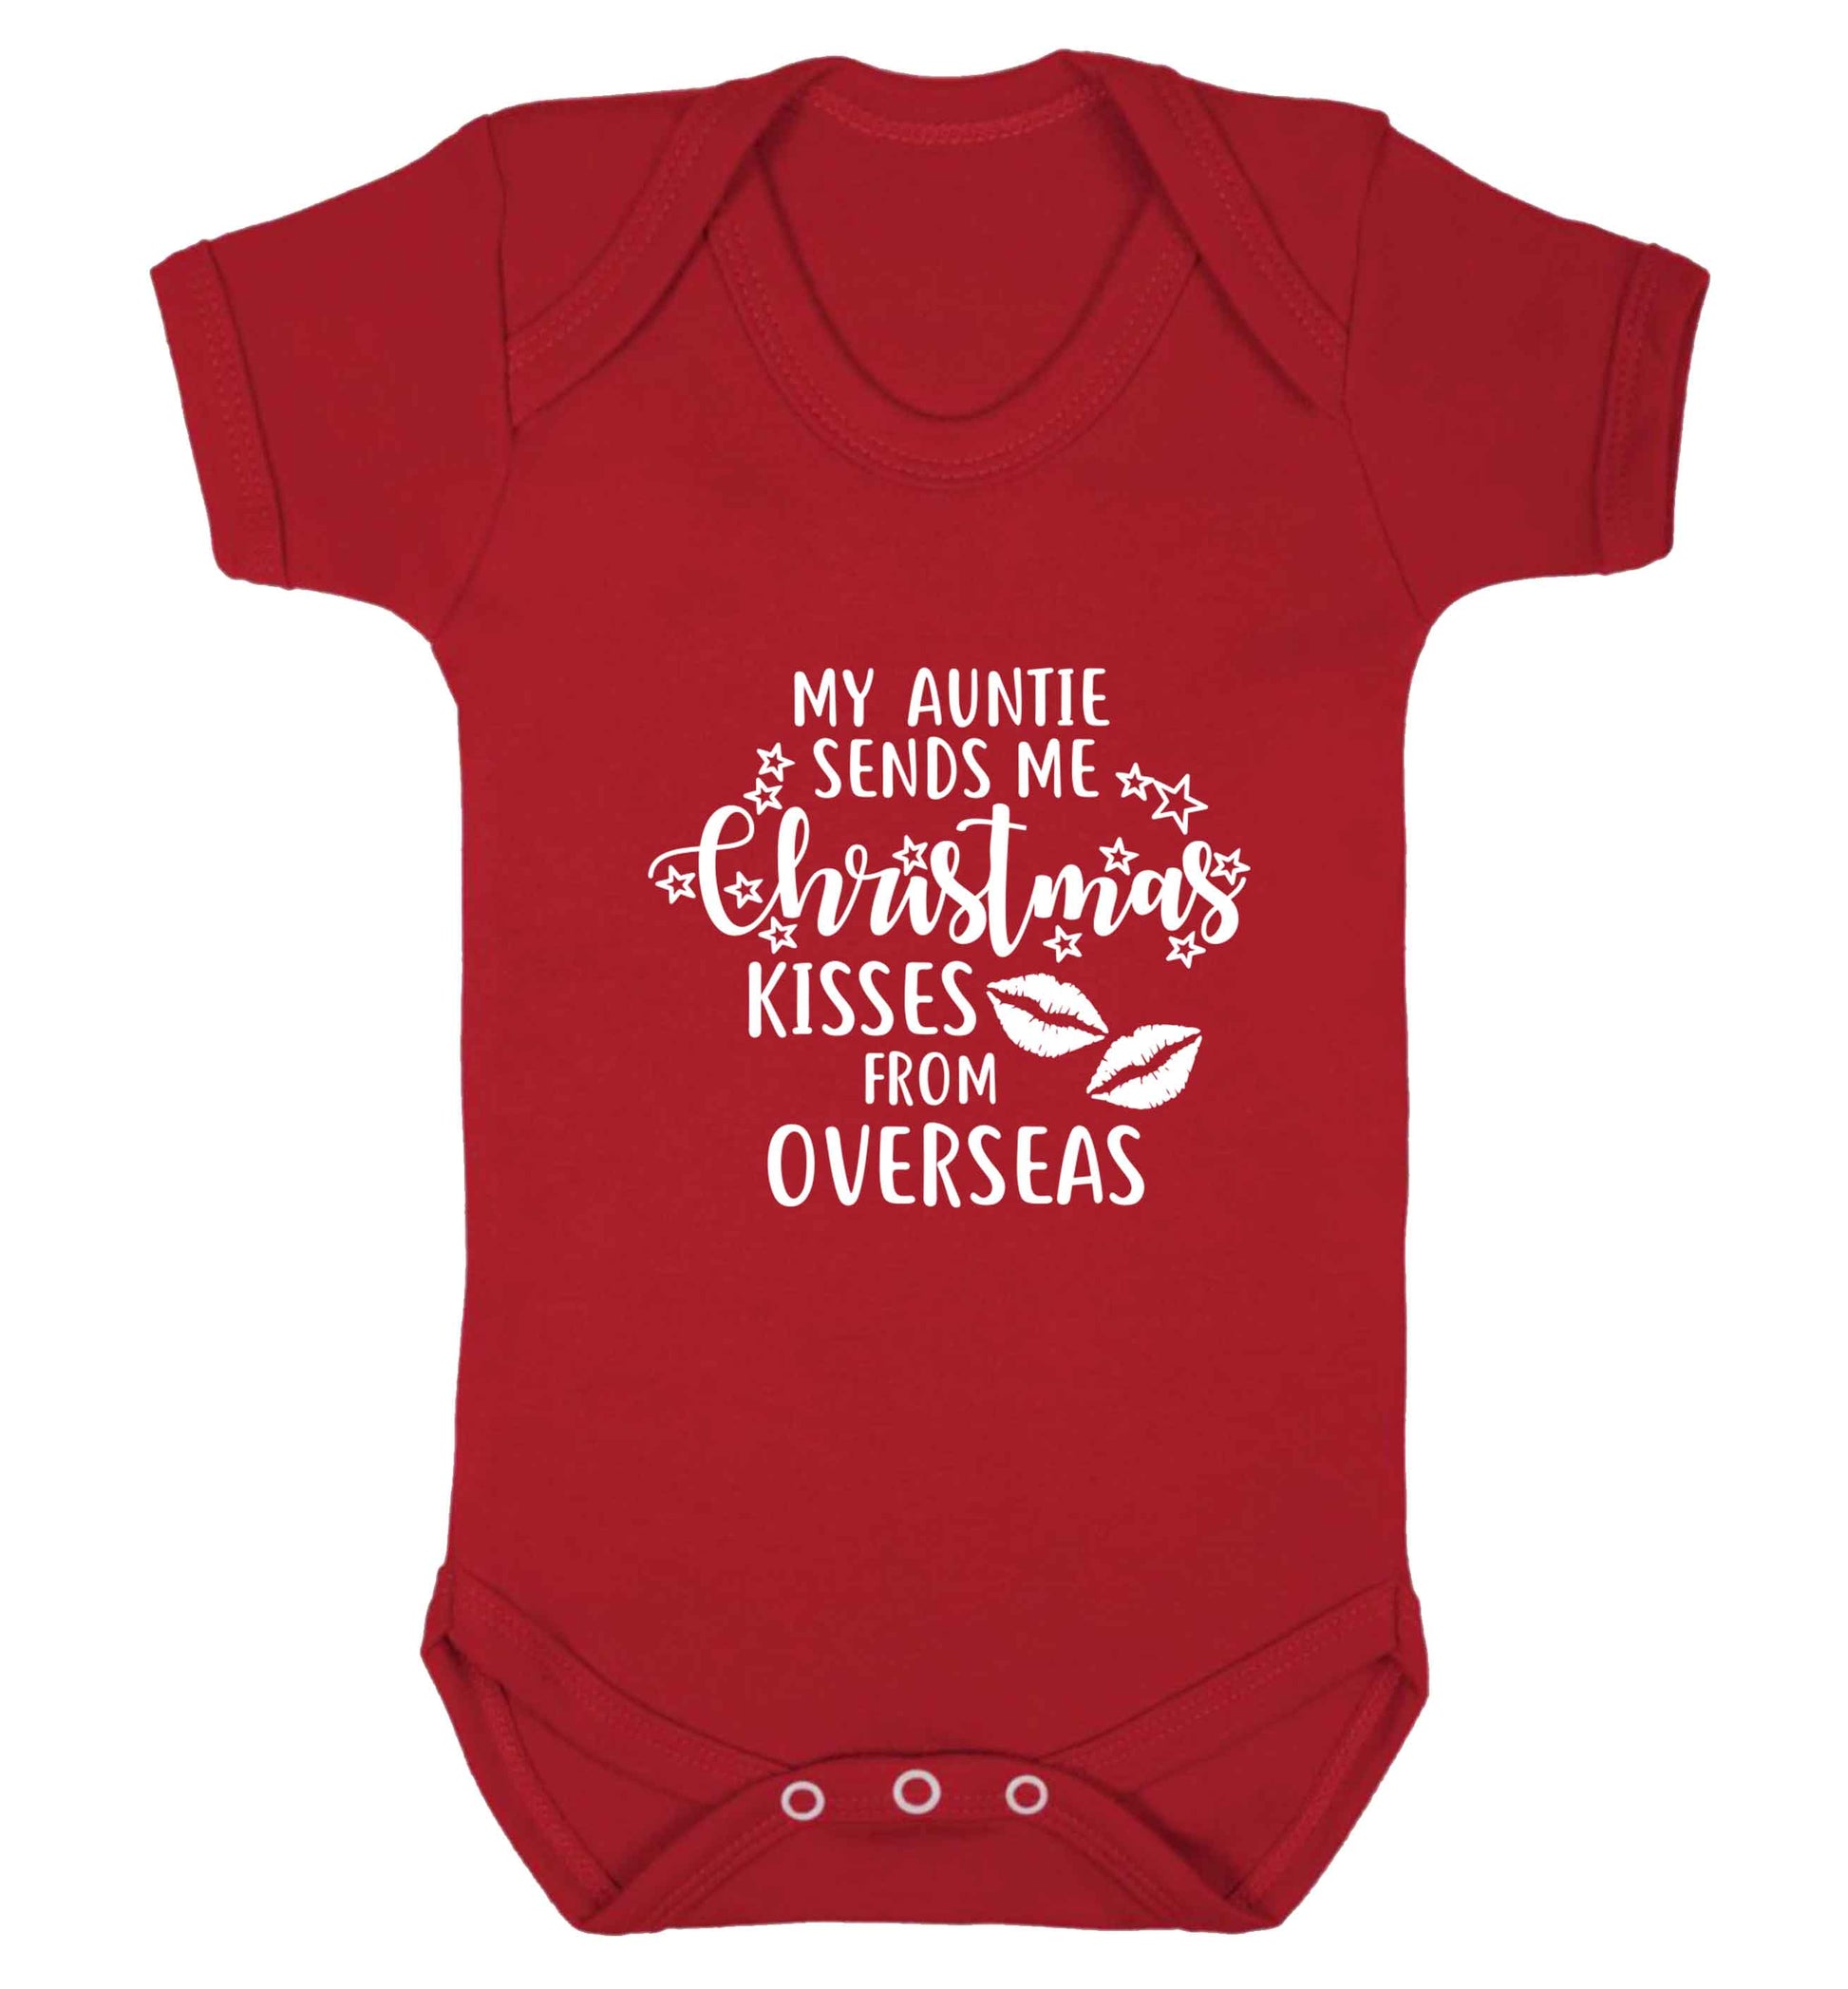 Auntie Christmas Kisses Overseas baby vest red 18-24 months